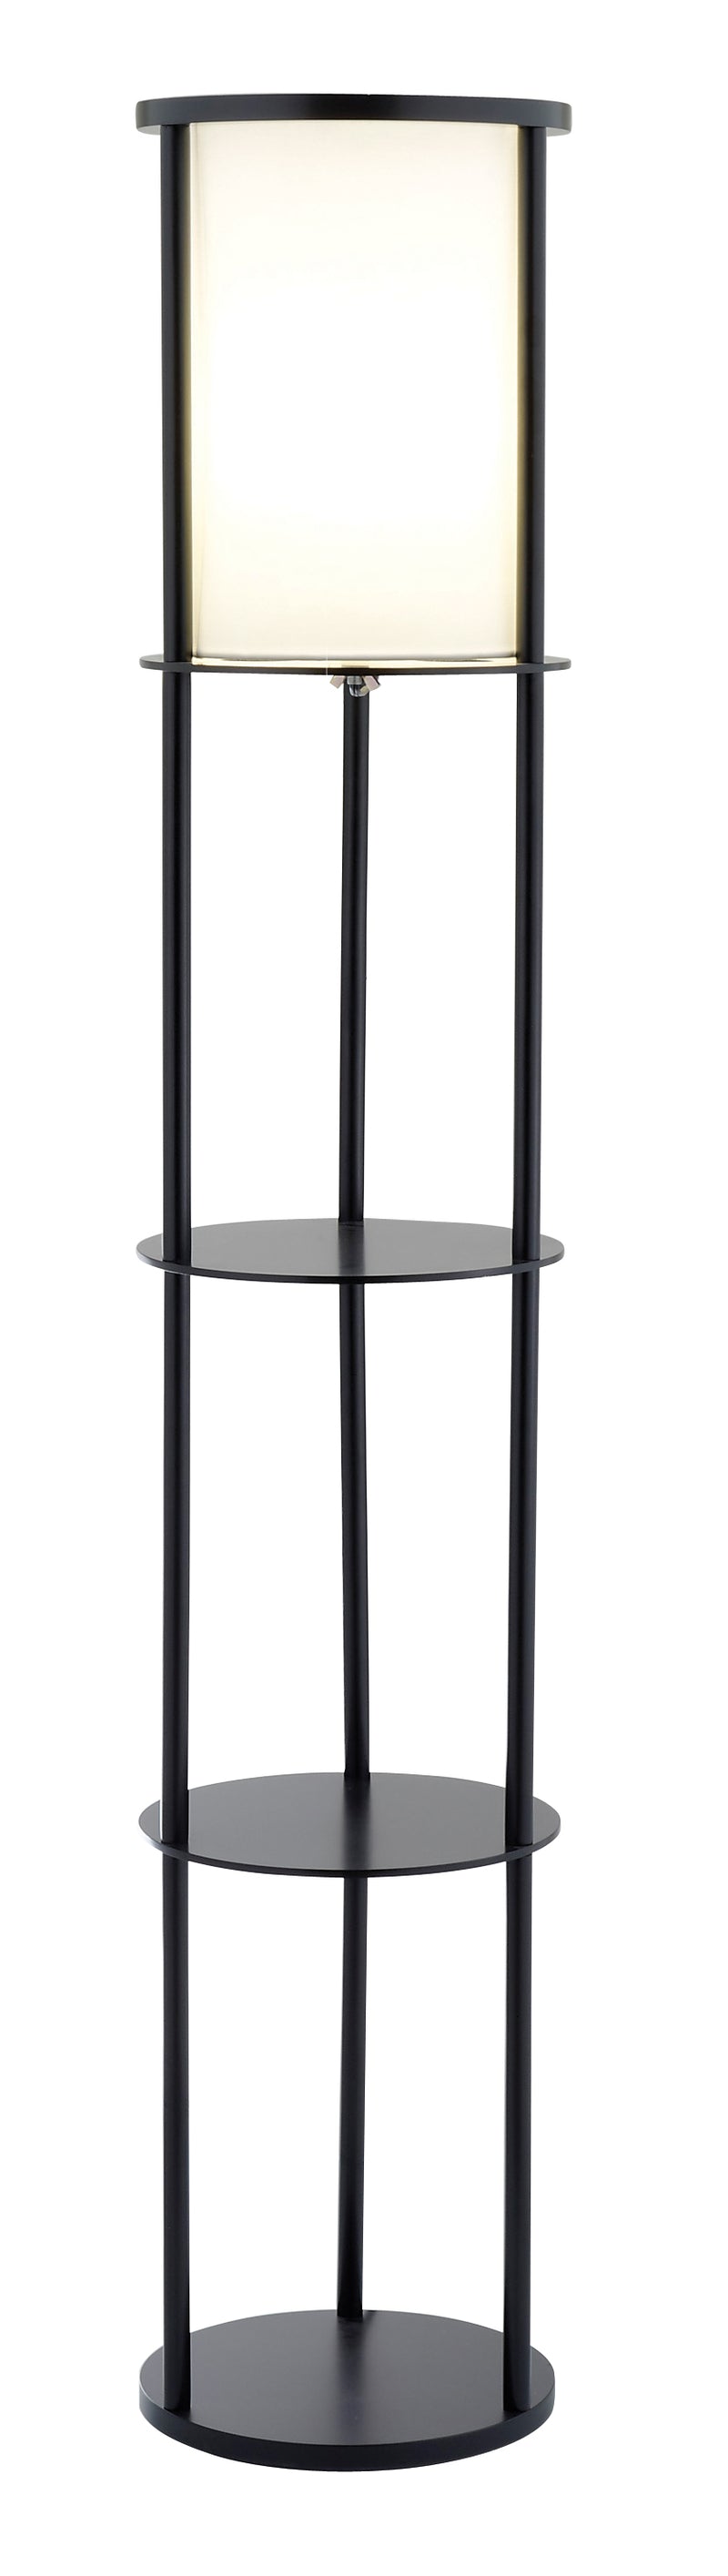 Home Outfitters Black Wood Finish Floor Lamp With Circular Storage Shelves